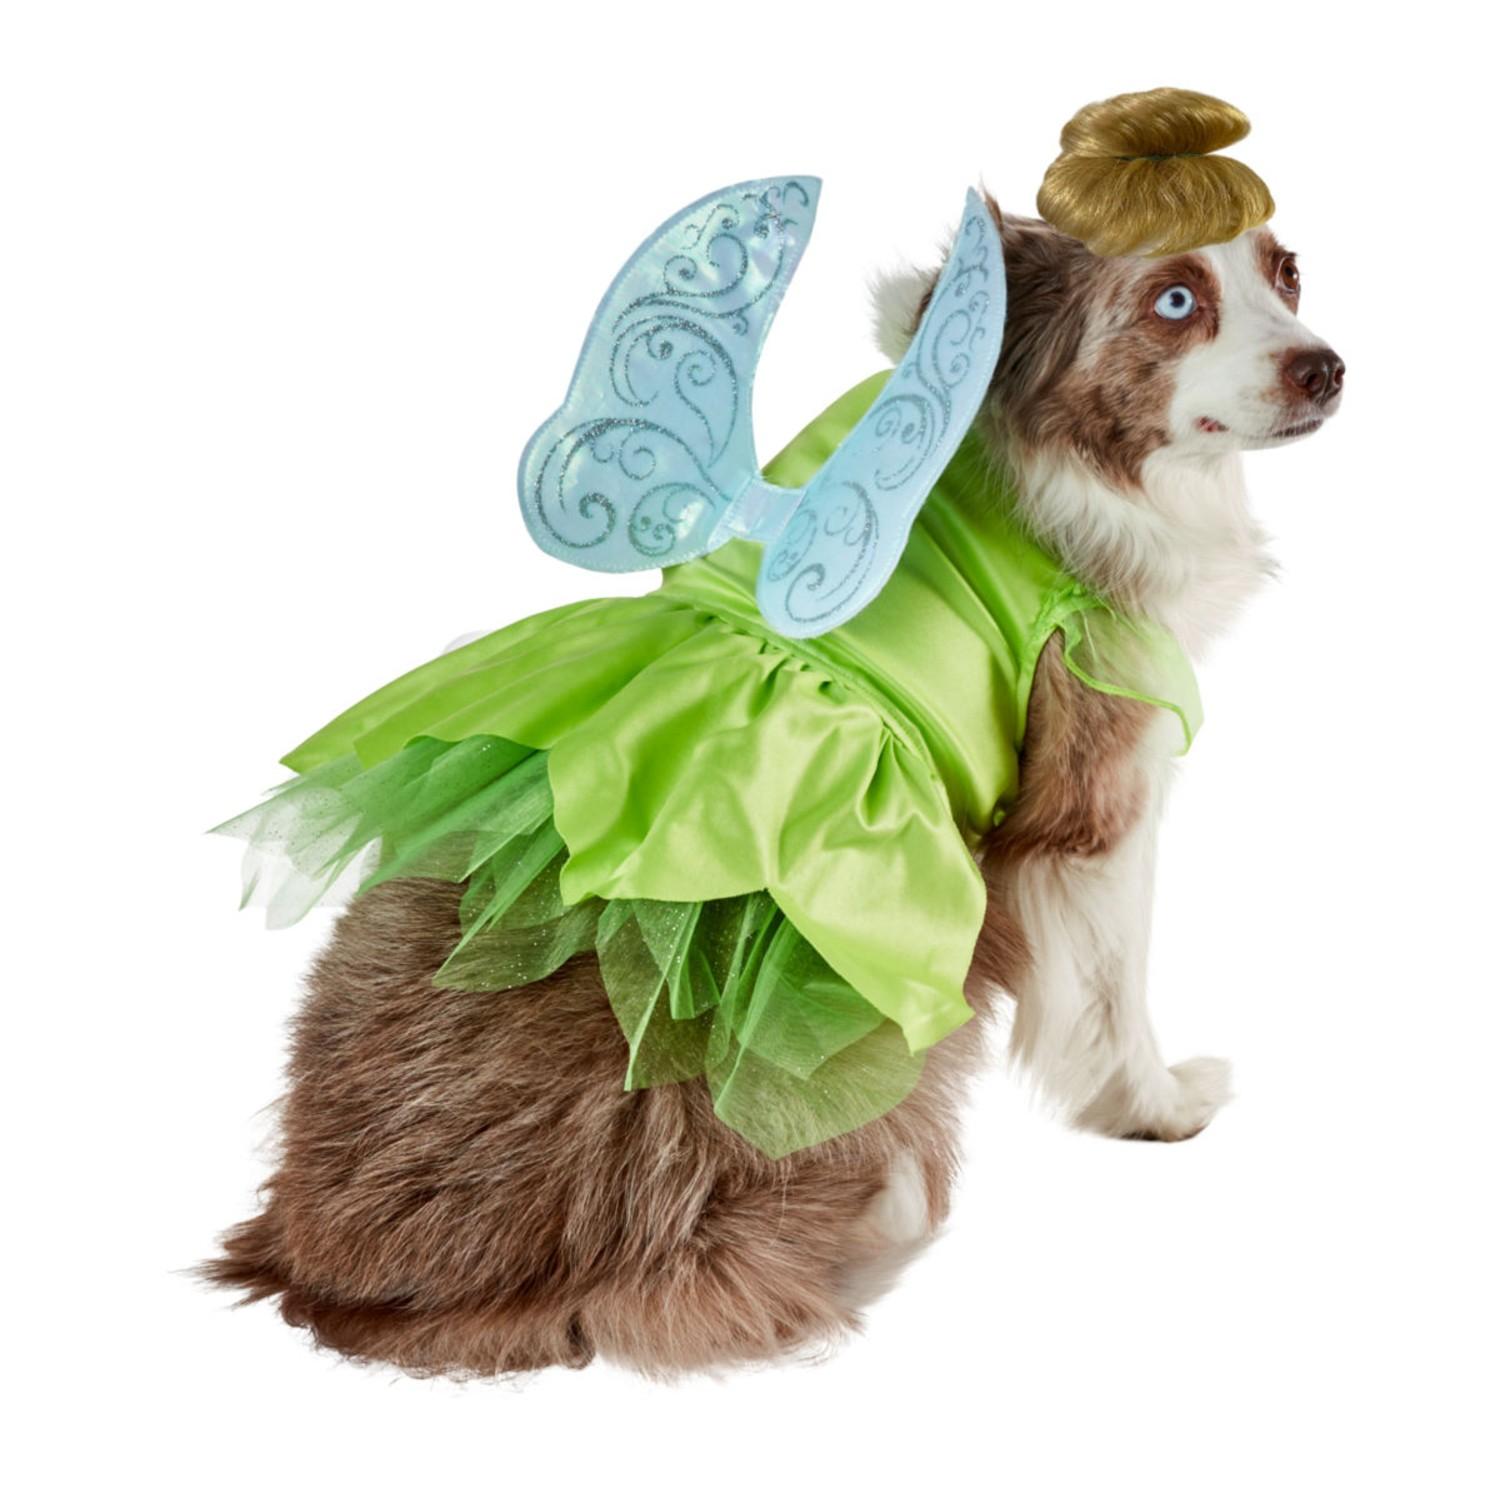 Peter Pan's Tinkerbell Dog Costume by Rubie's